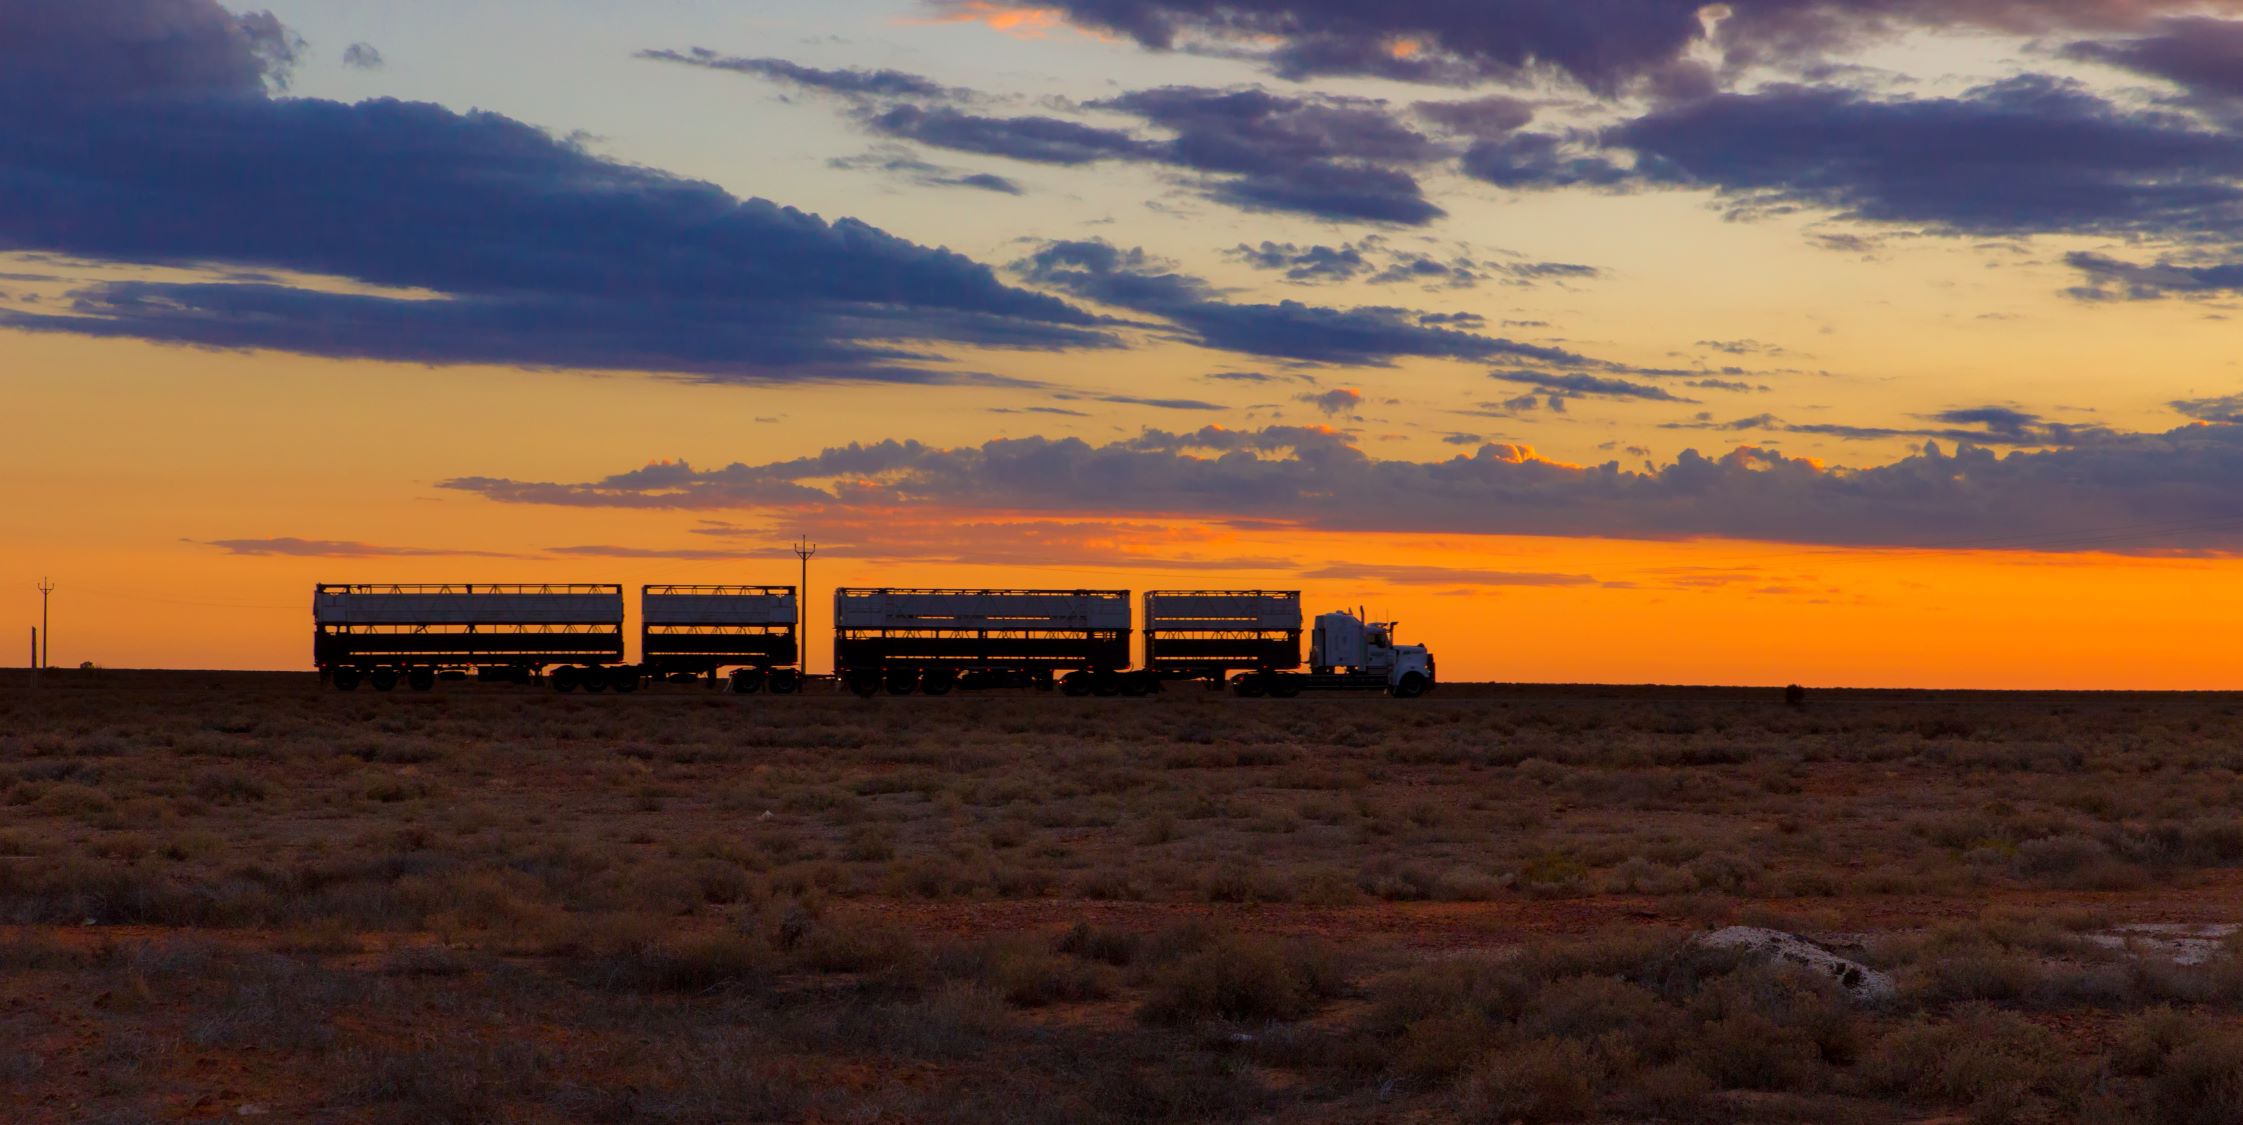 Road train at sunset in the country